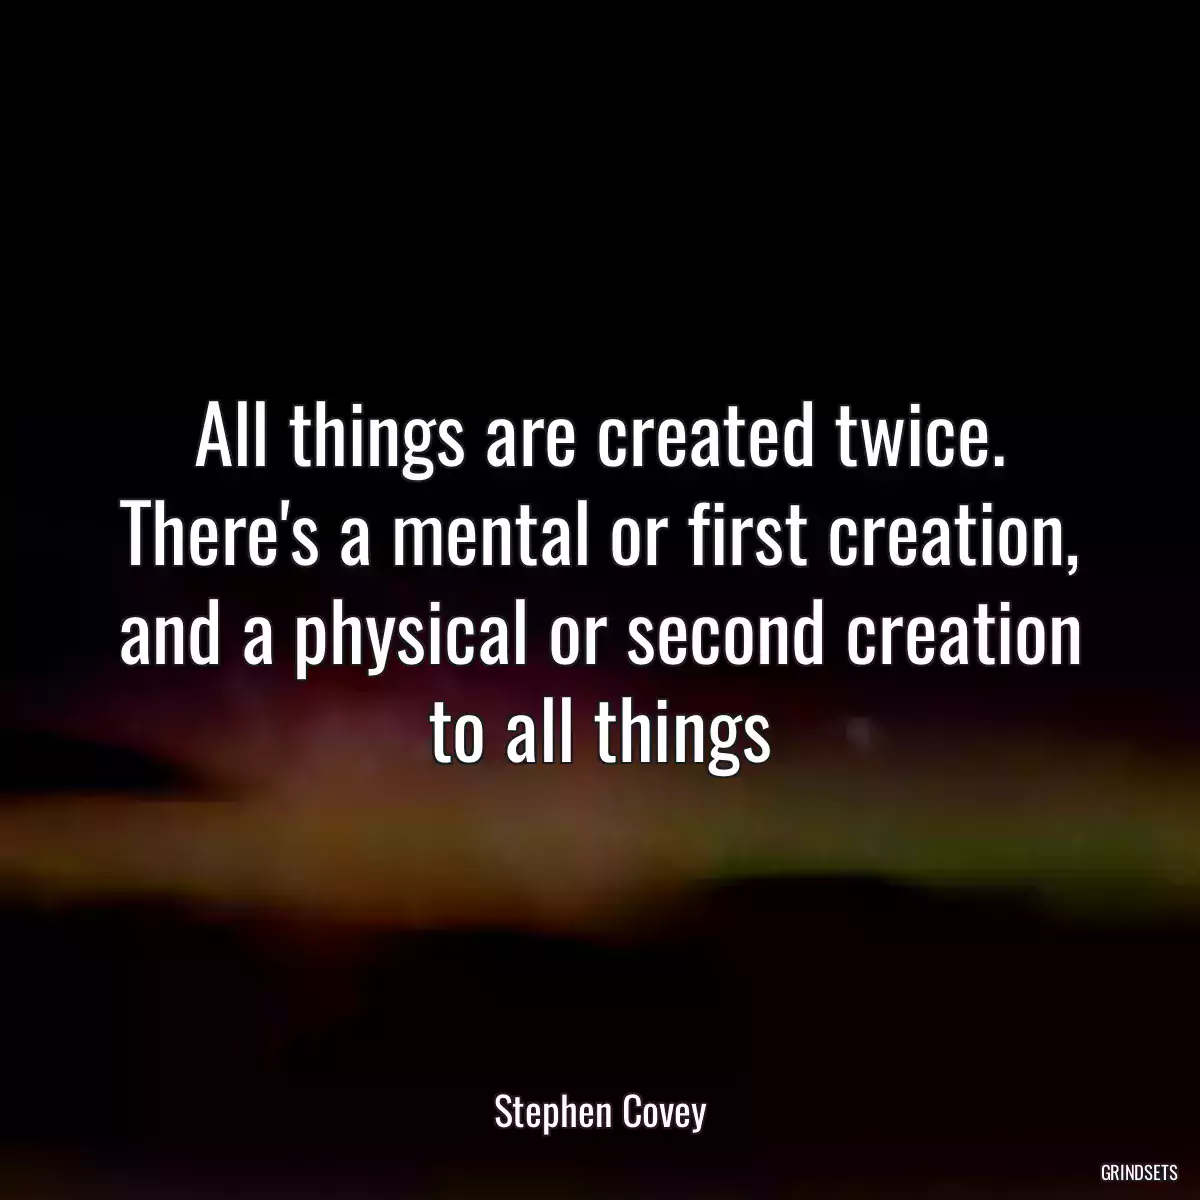 All things are created twice. There\'s a mental or first creation, and a physical or second creation to all things